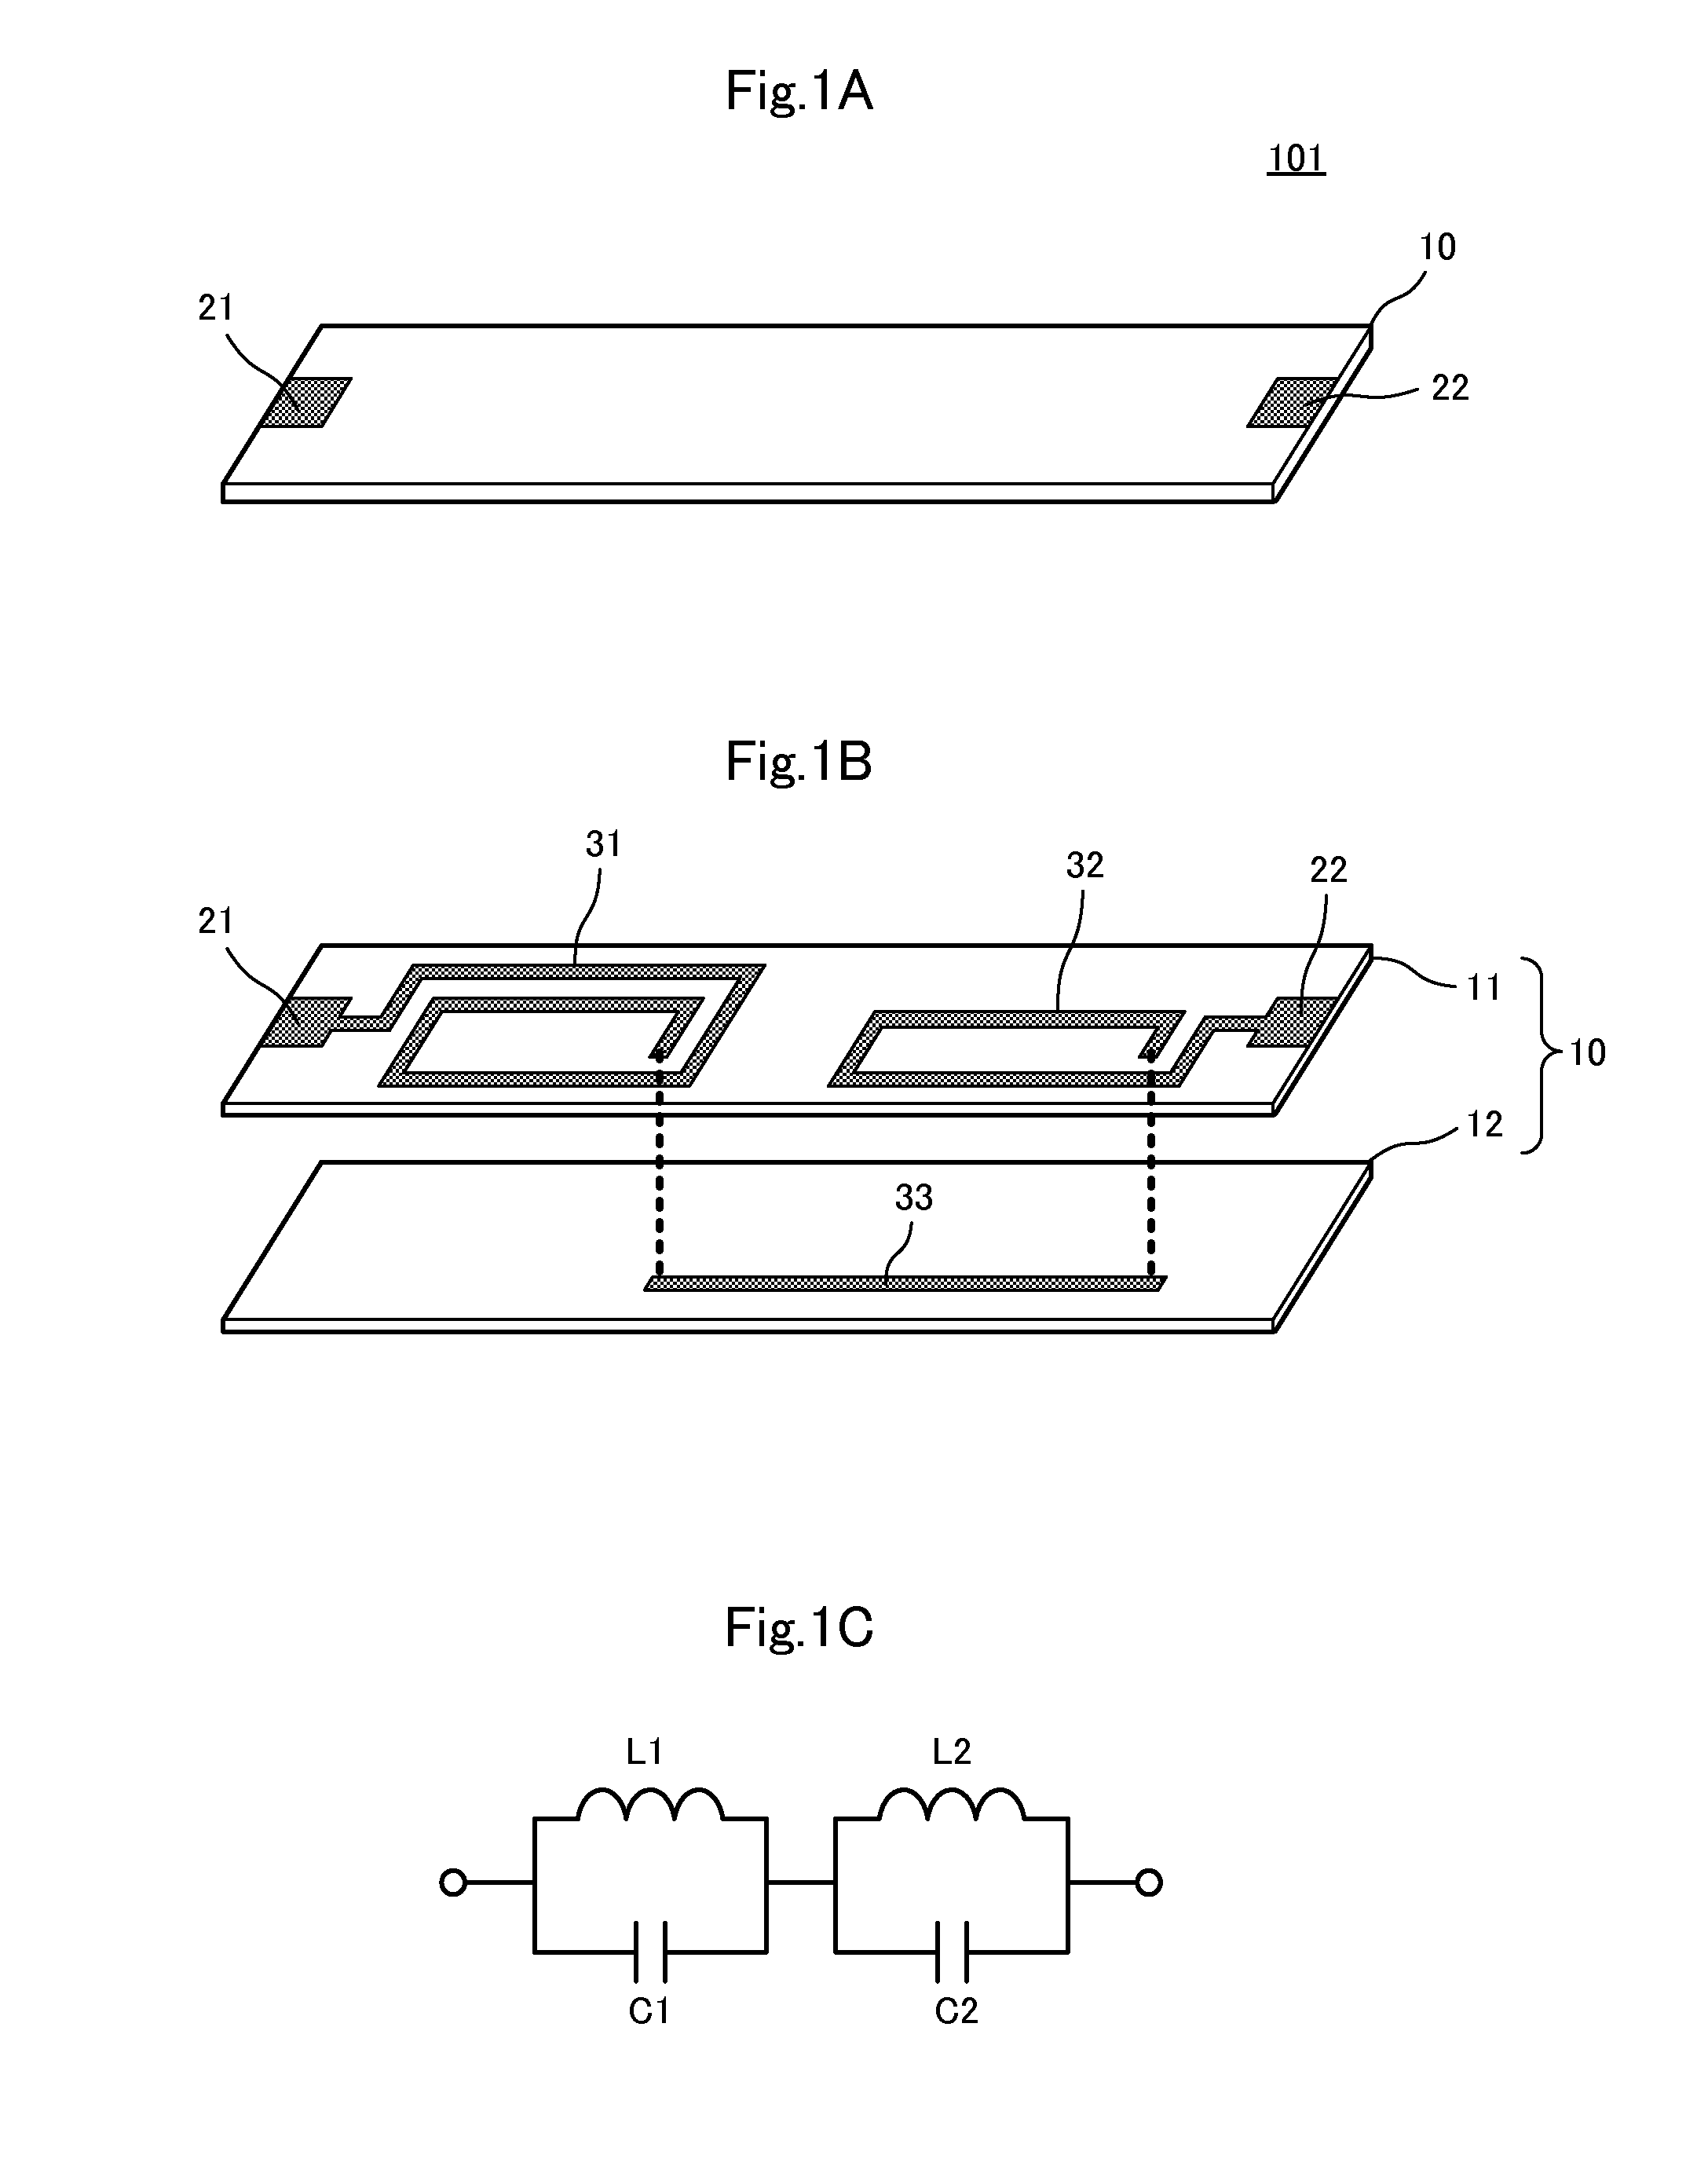 Inductor element, inductor bridge, and high-frequency filter